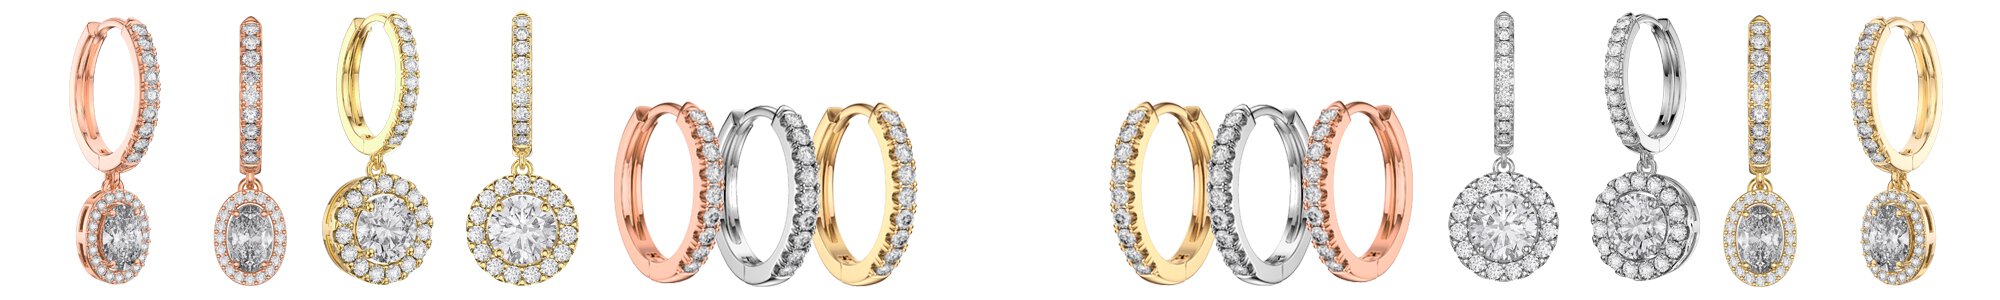 Shop Hoop Earrings by Jian London. Choose from our great selection of earrings direct at the Jian London Jewellery Store. Free UK delivery.